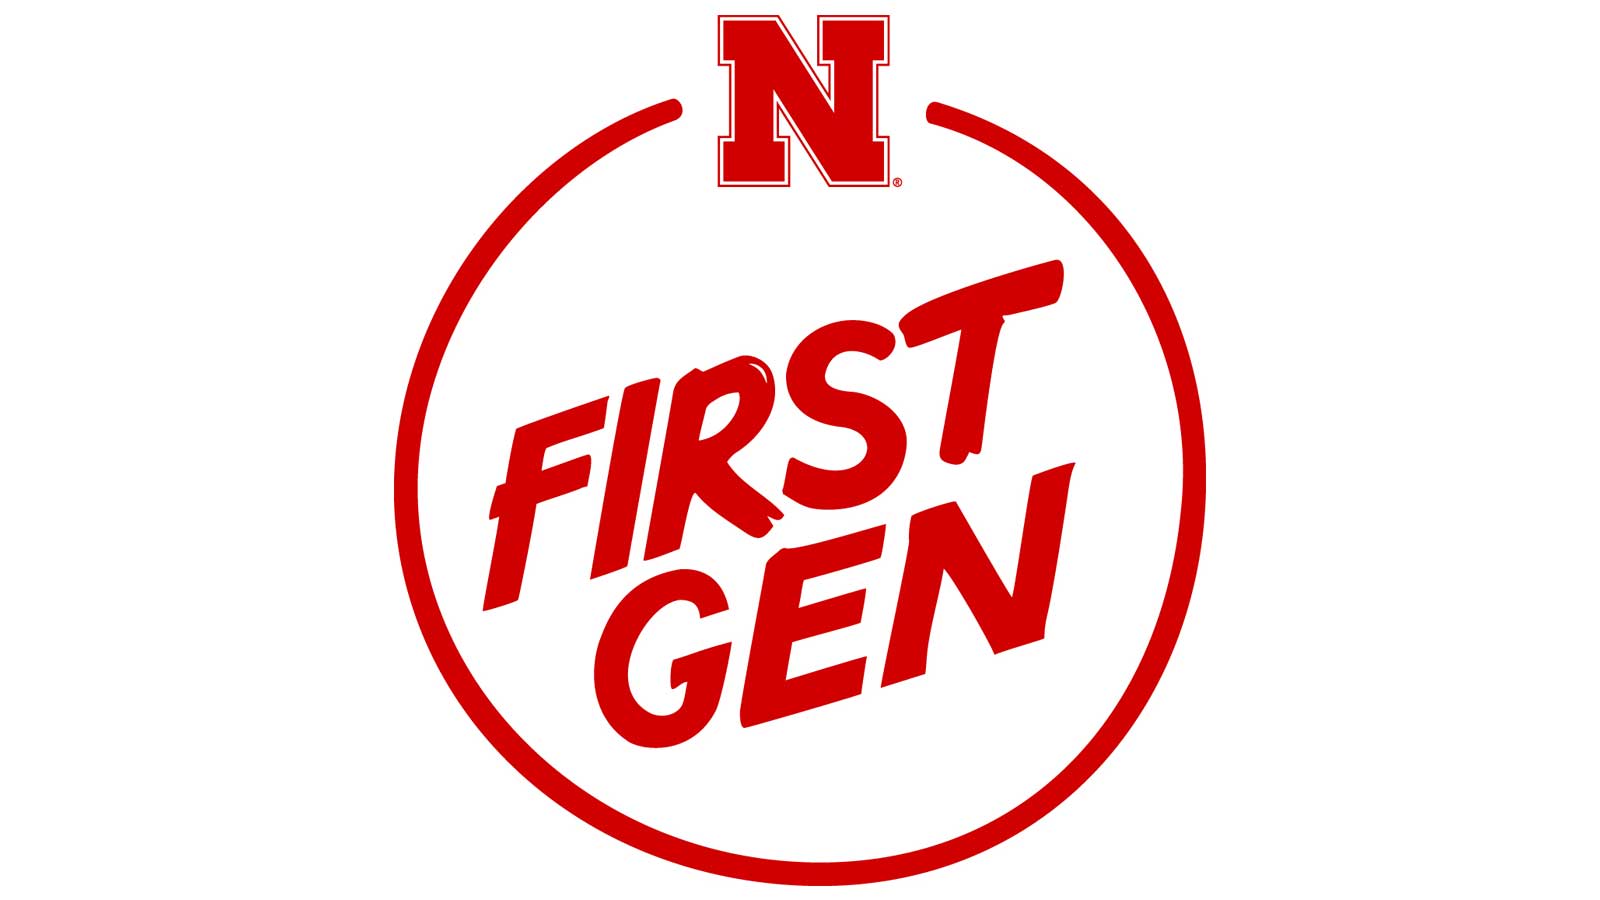 First Generation Nebraska works to develop connections between first-generation college students and faculty and staff.